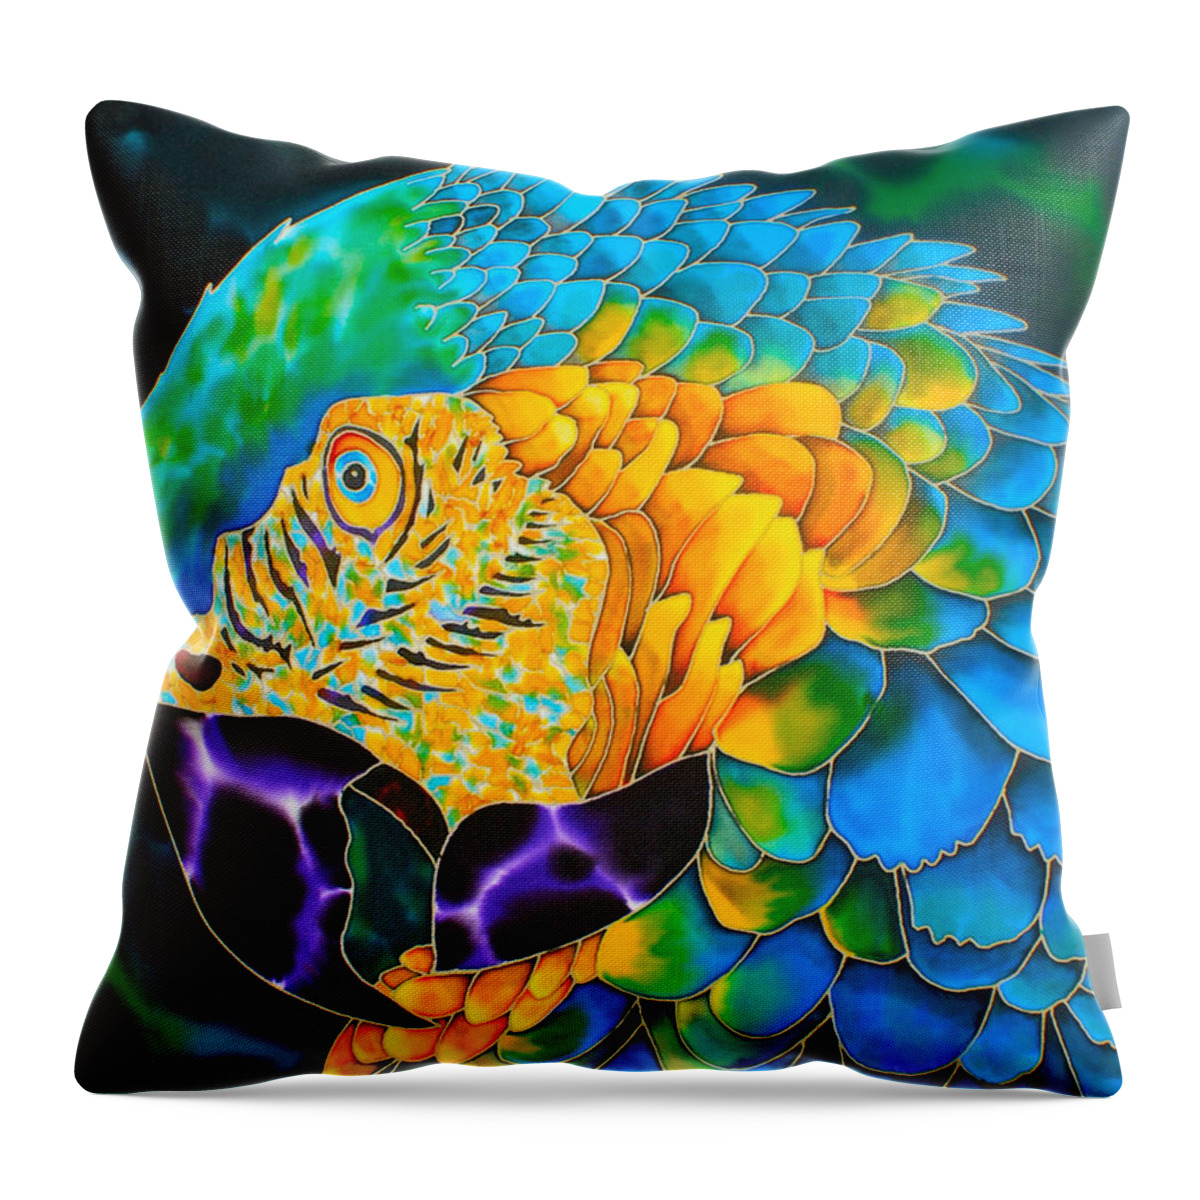 Turquoise Gold Macaw Throw Pillow featuring the painting Turquoise Gold Macaw by Daniel Jean-Baptiste